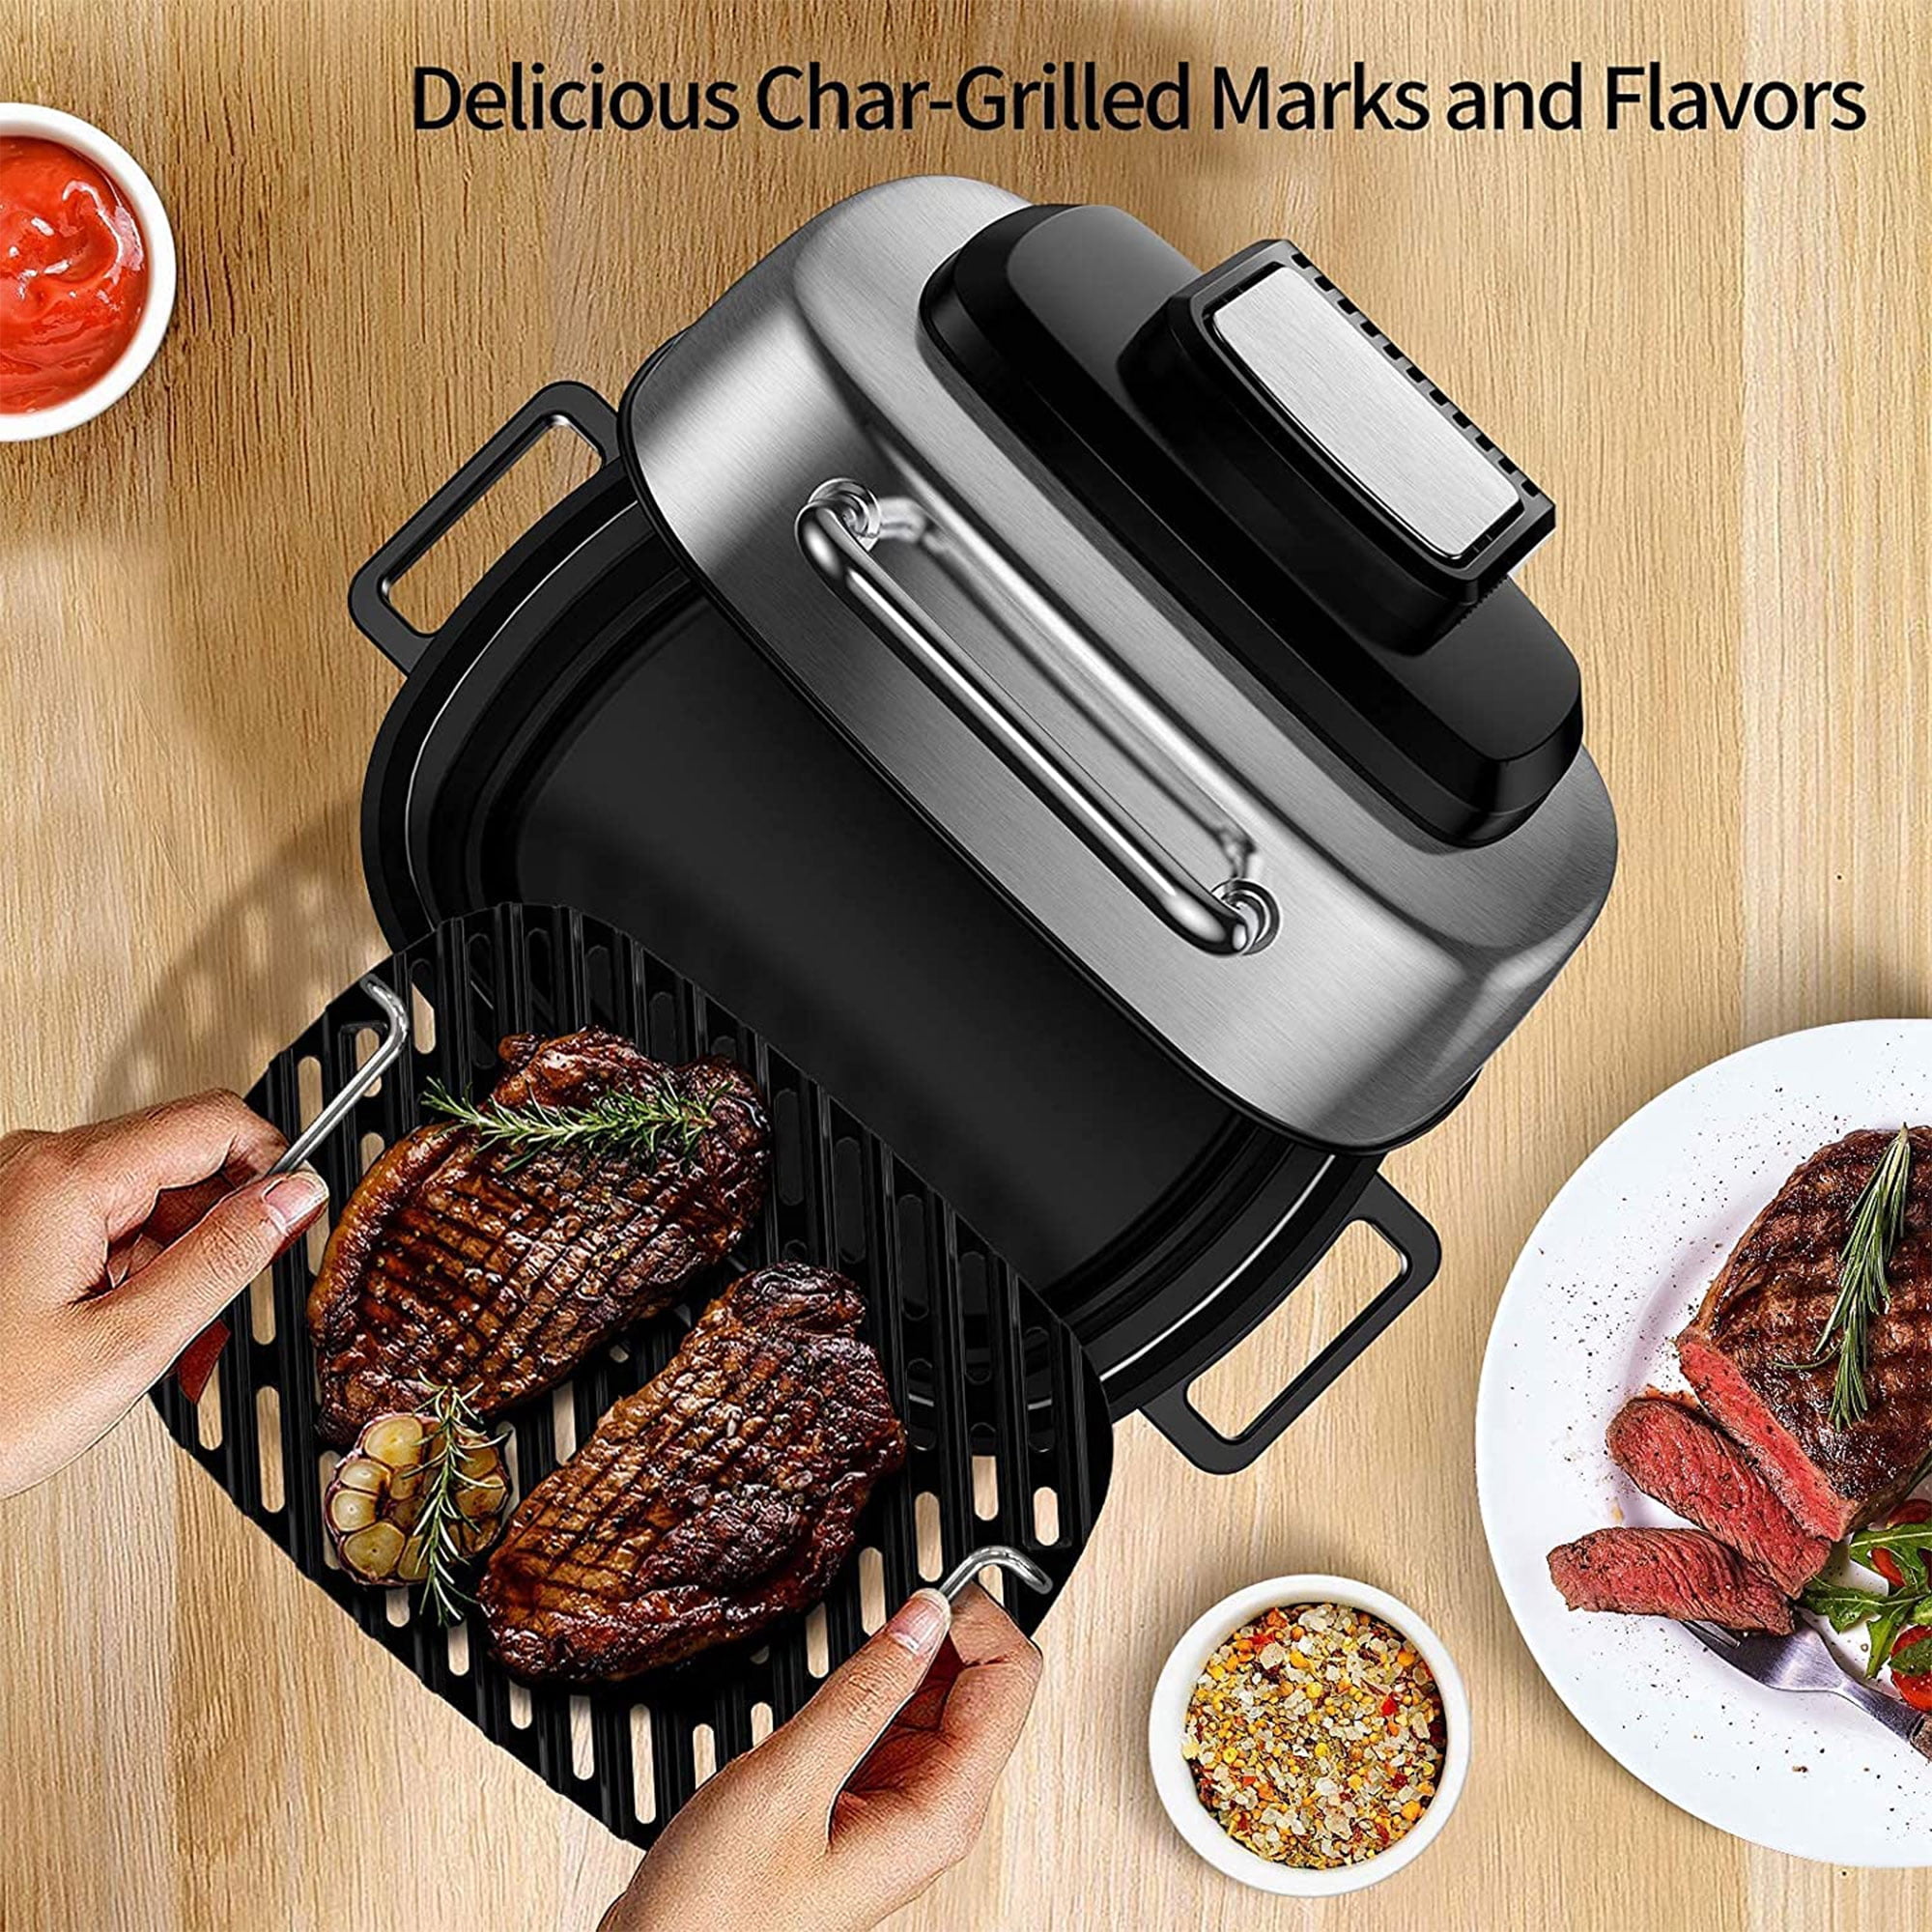 Danby DBSG29412XD11 Smokeless Indoor Grill in Black Advanced Air  Circulation Technology Independent on/off and temperatures.